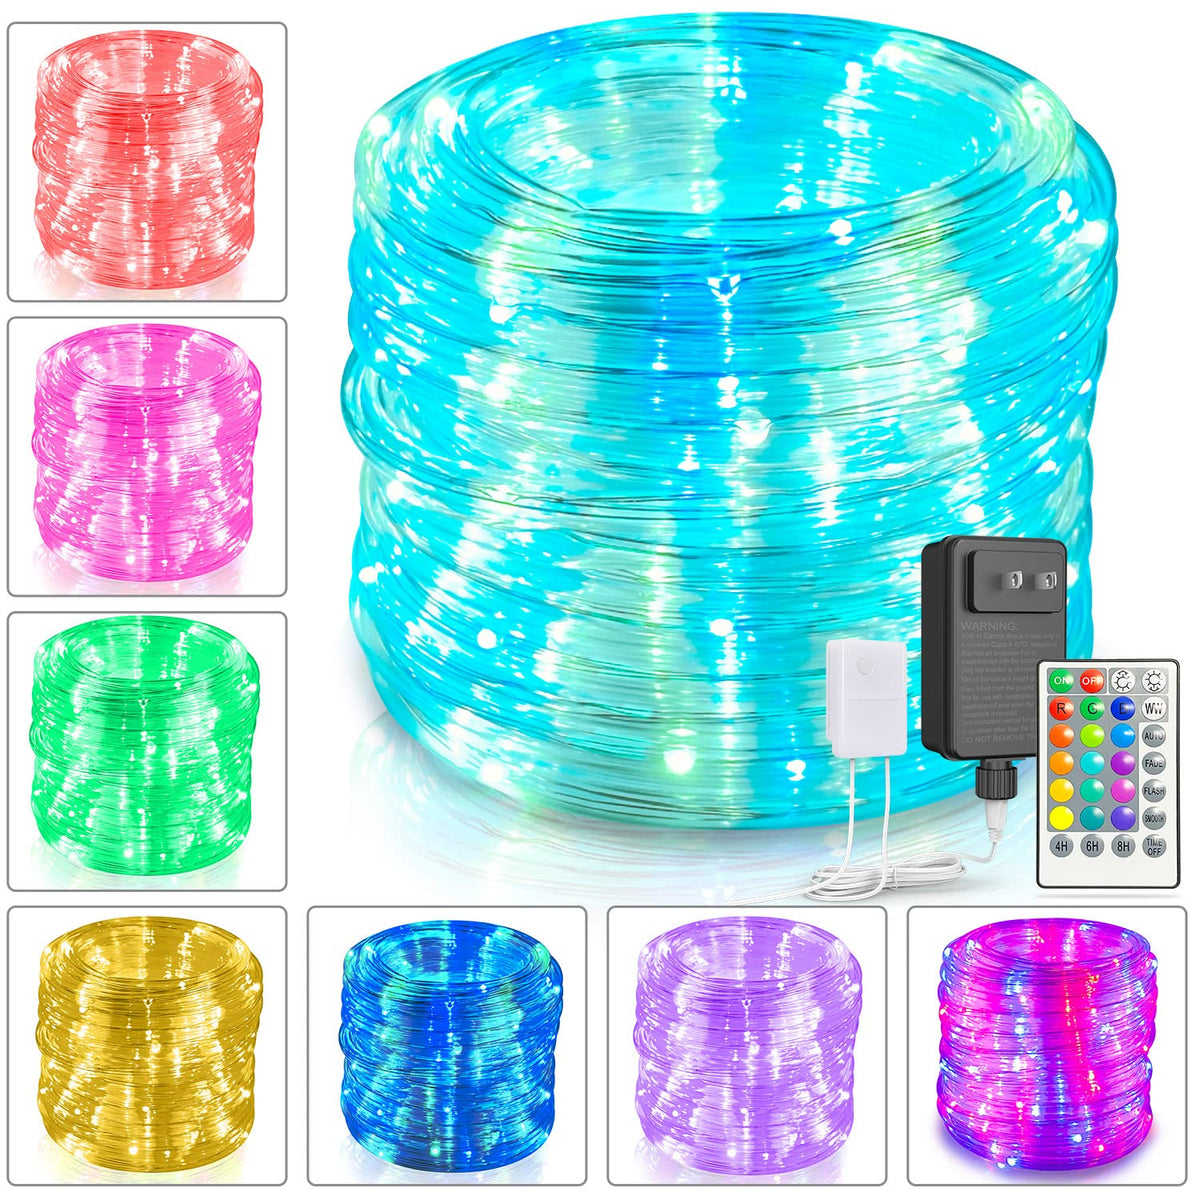 SURLED 99Ft Rope Lights Outdoor, 16 Colors Outdoor String Light